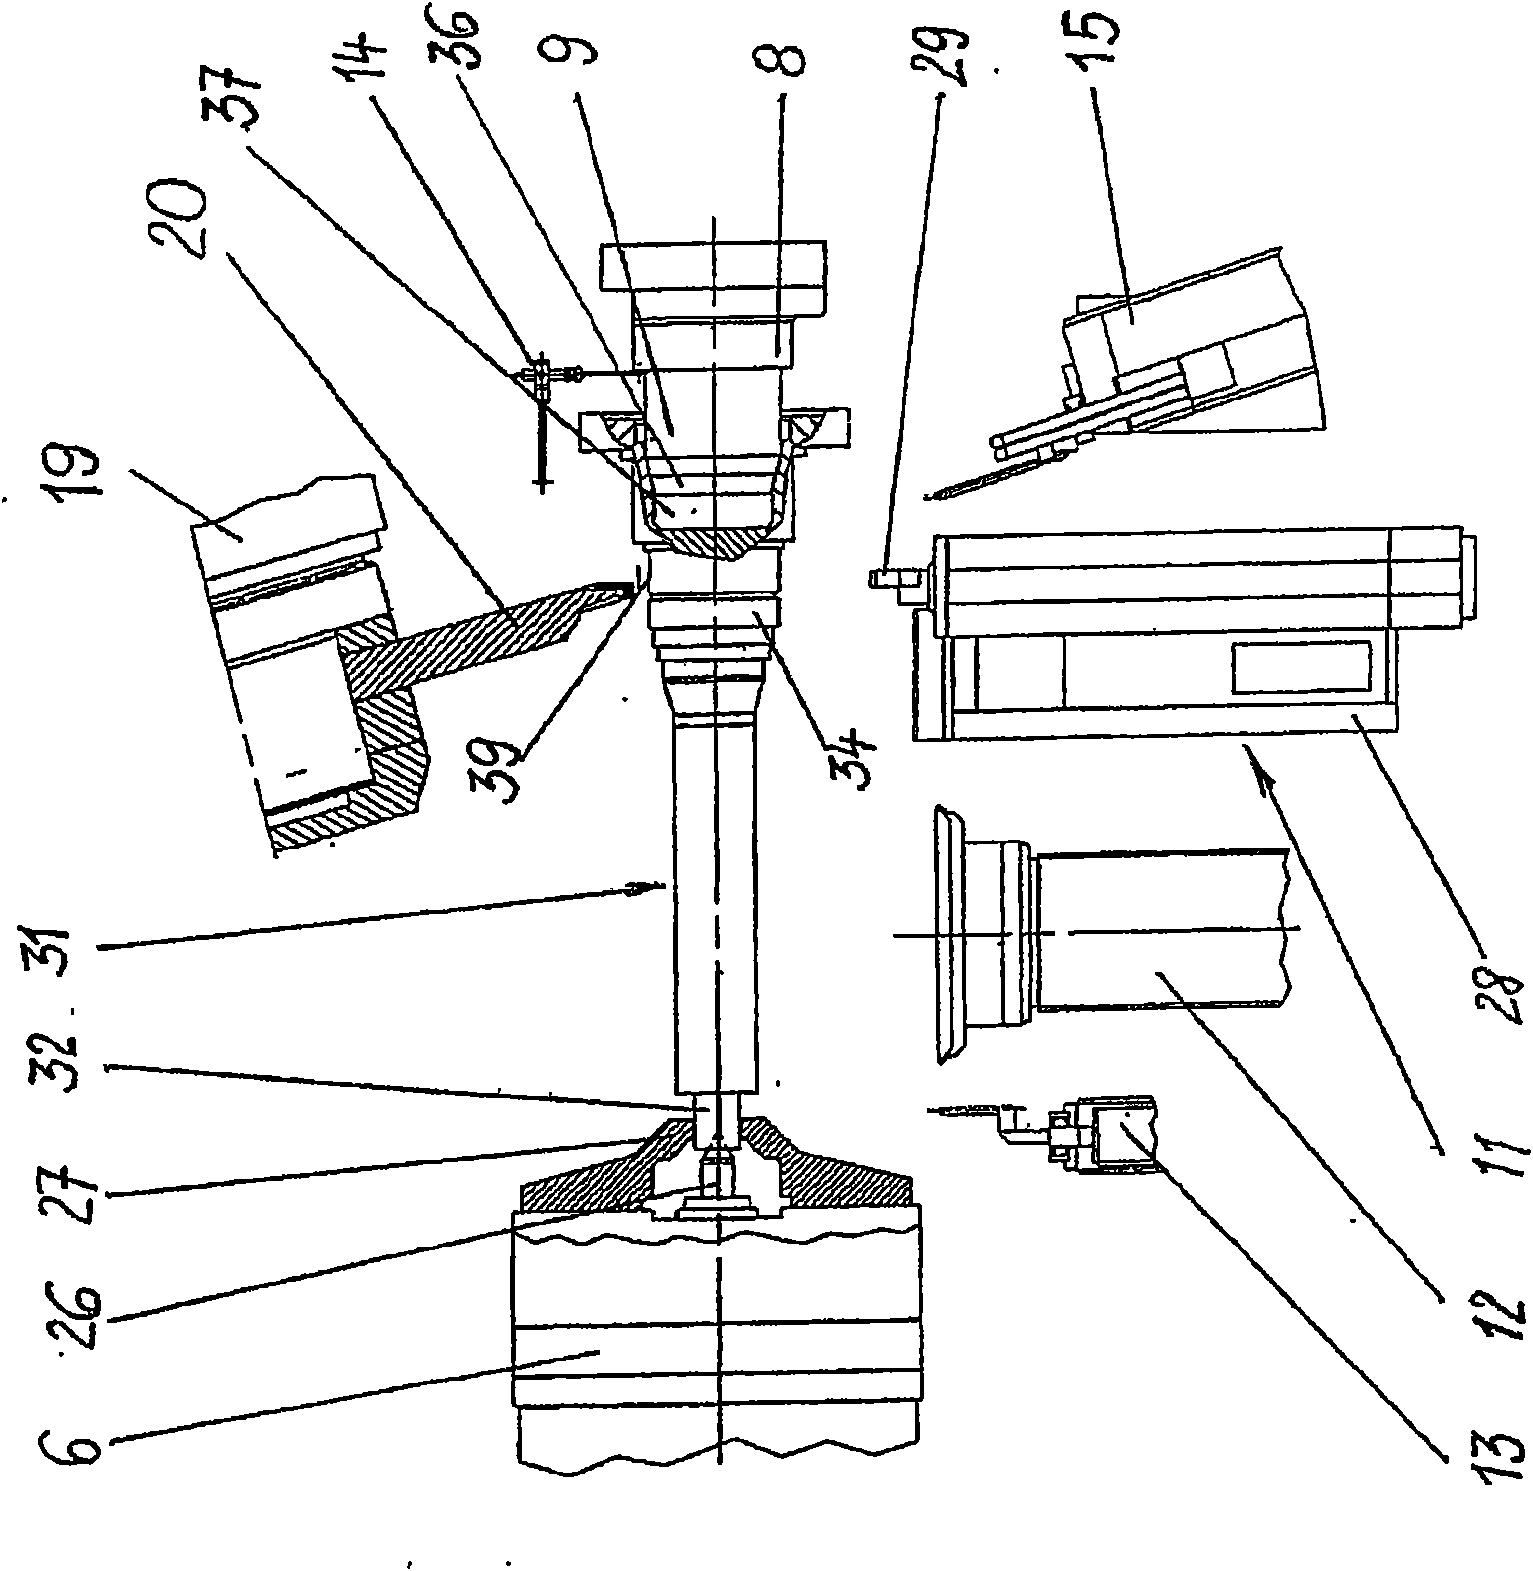 Method for grinding a machine part, and grinding machine for carrying out said method